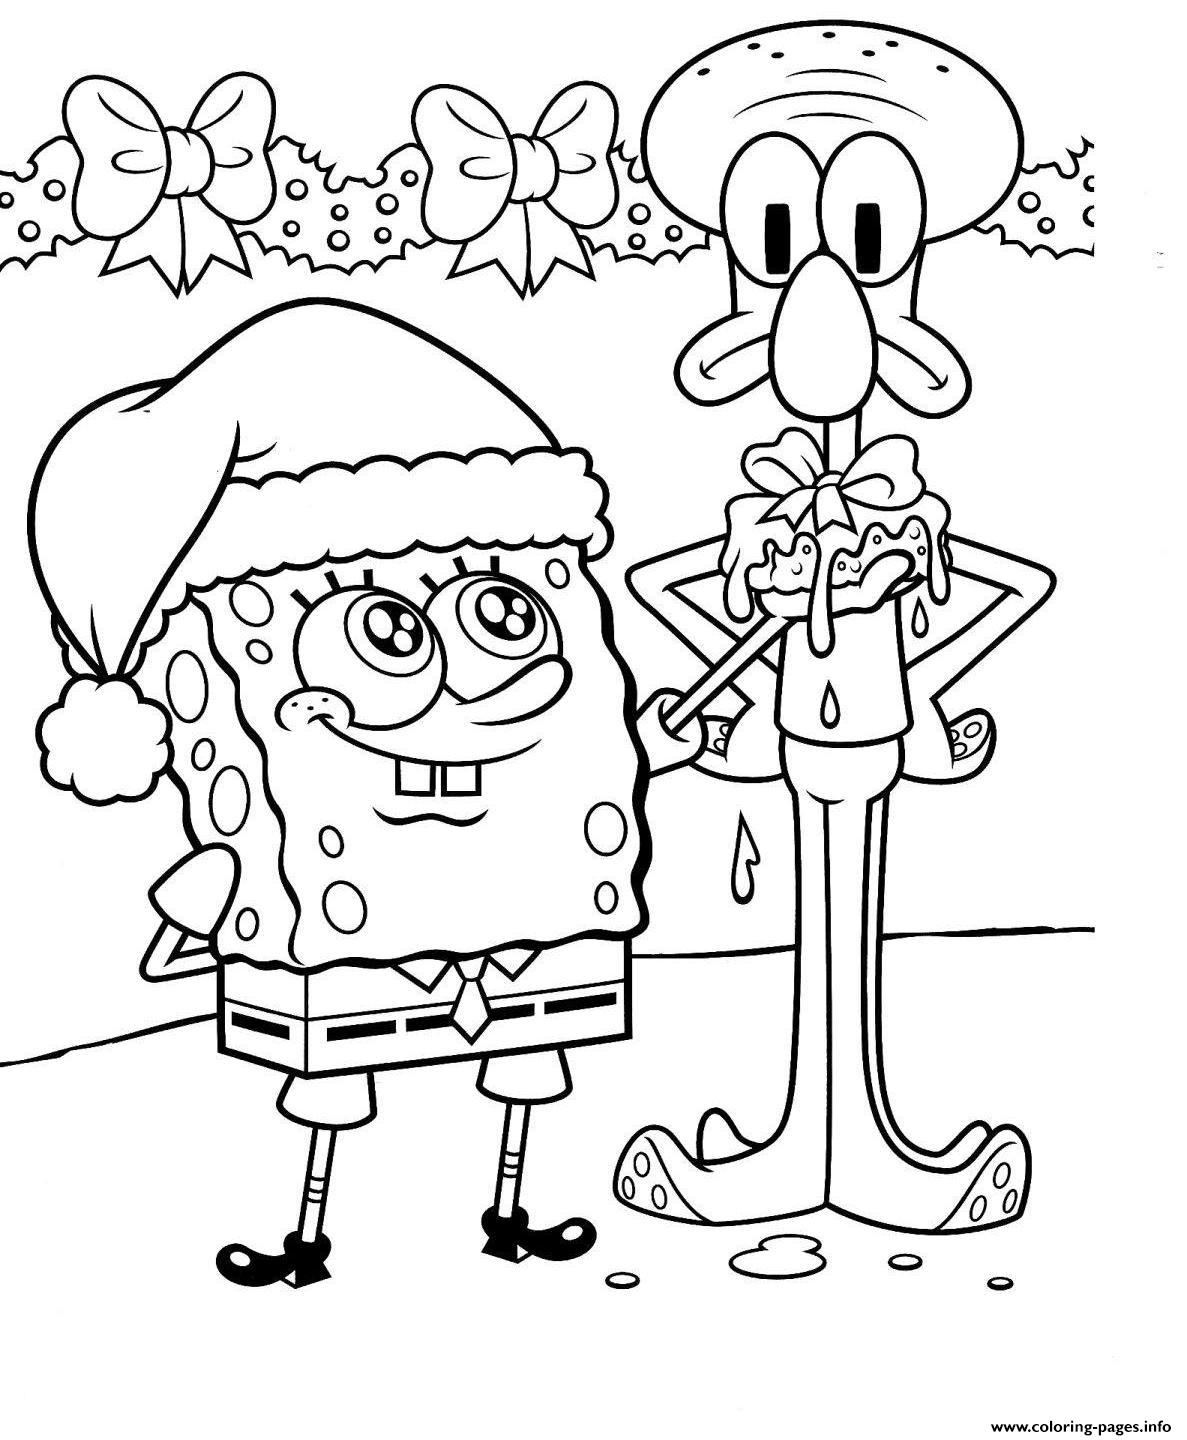 Spongebob Colouring Pages For Children Christmasb7e0 coloring pages